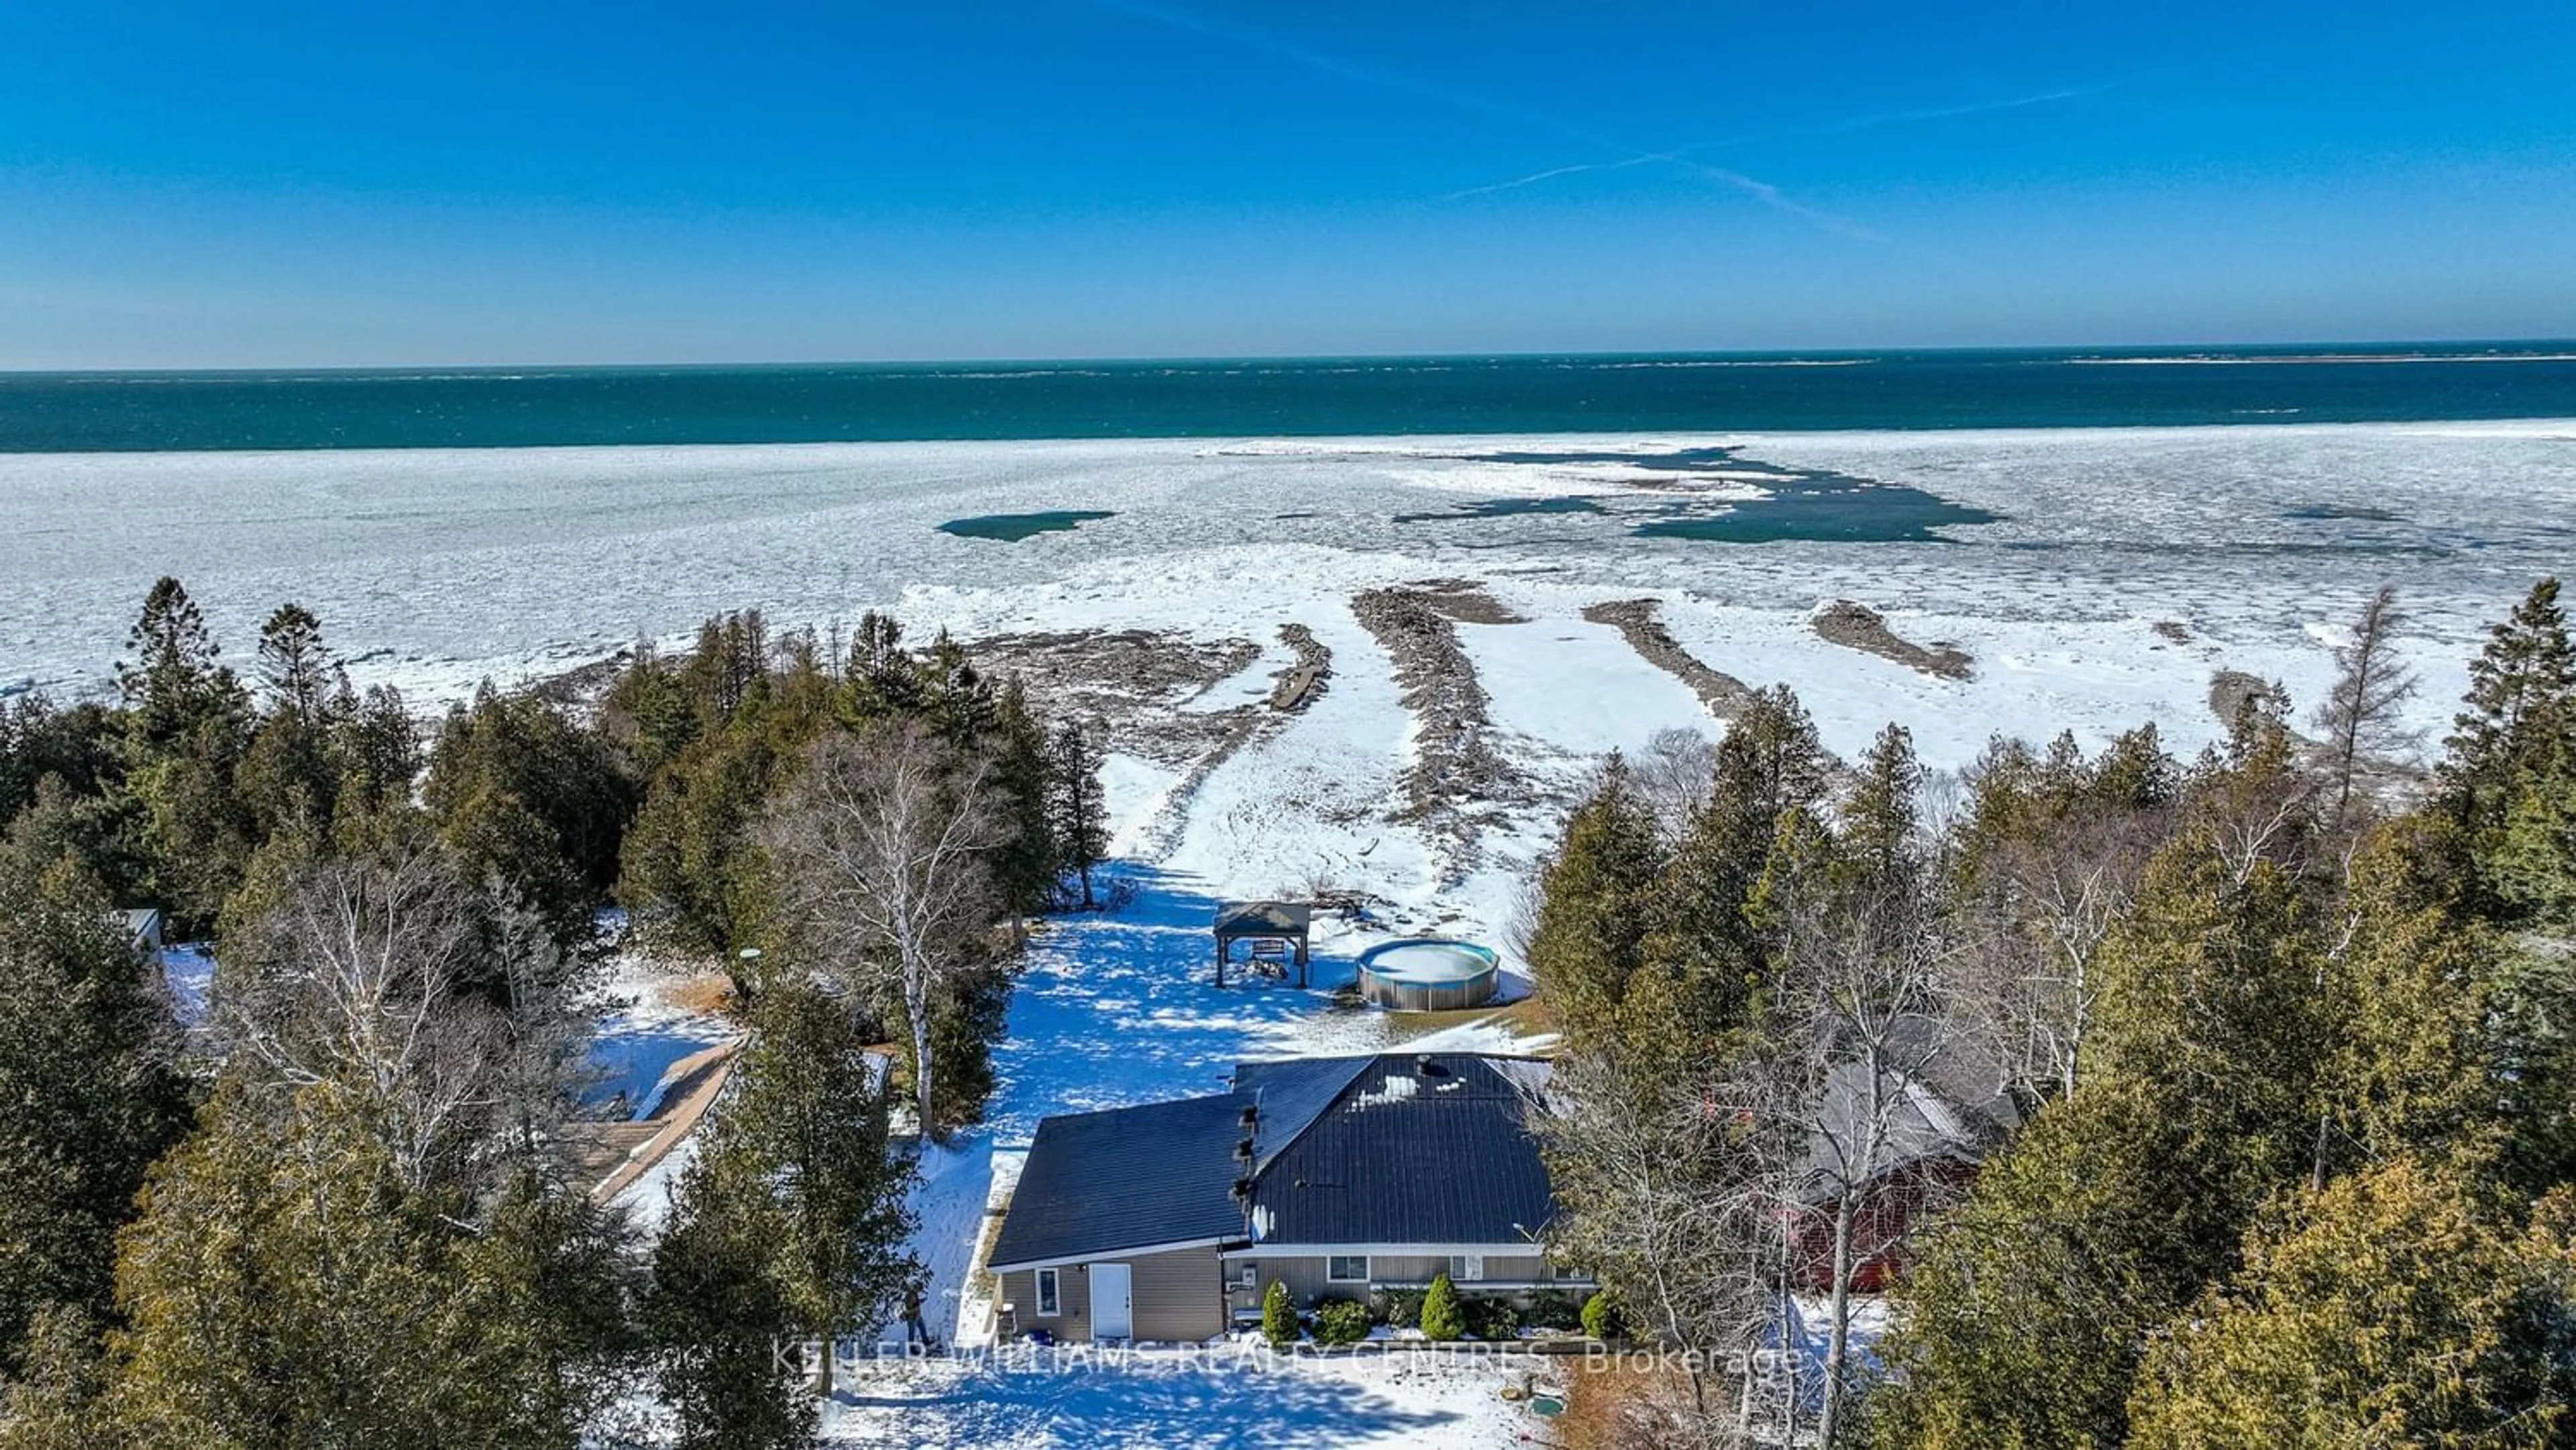 Lakeview for 1256 Sunset Dr, South Bruce Peninsula Ontario N0H 2T0